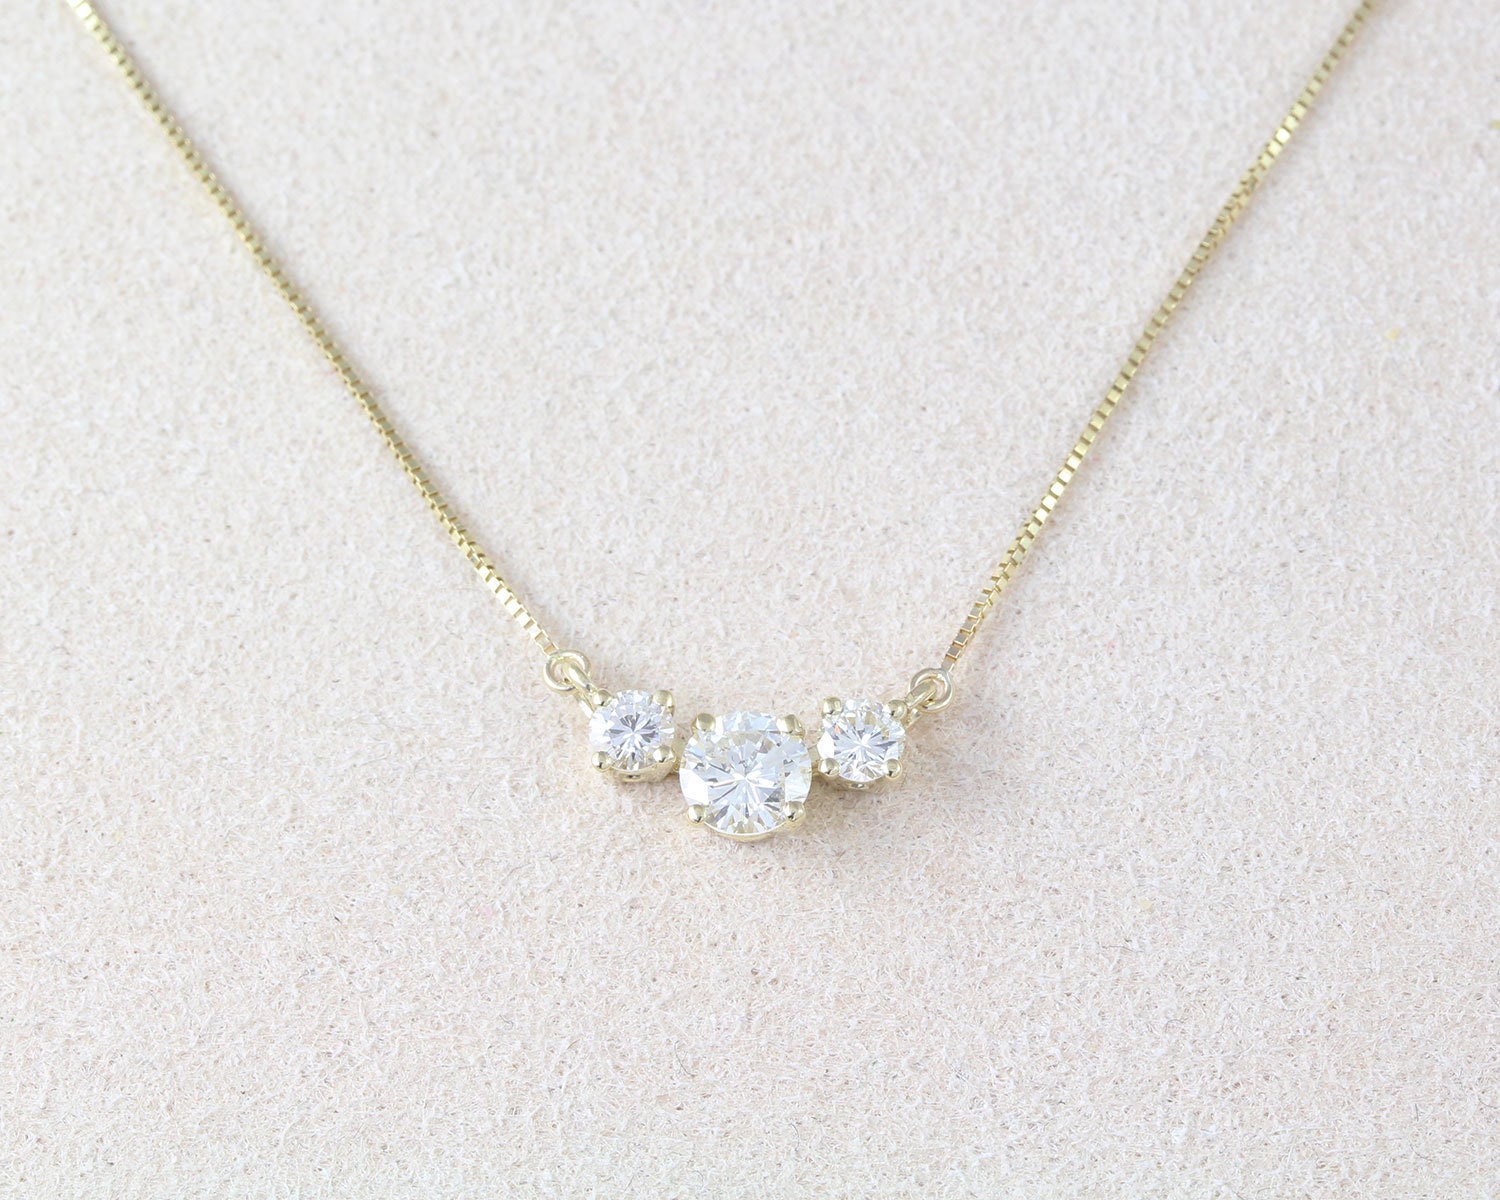 Buy GELINDiamond Three Stone Necklace | 14k Yellow Gold Bezel Set Necklaces  for Women | 14k Solid Gold Pendant Necklace | Delicate Diamond Jewelry |  Gifts for Christmas, 18